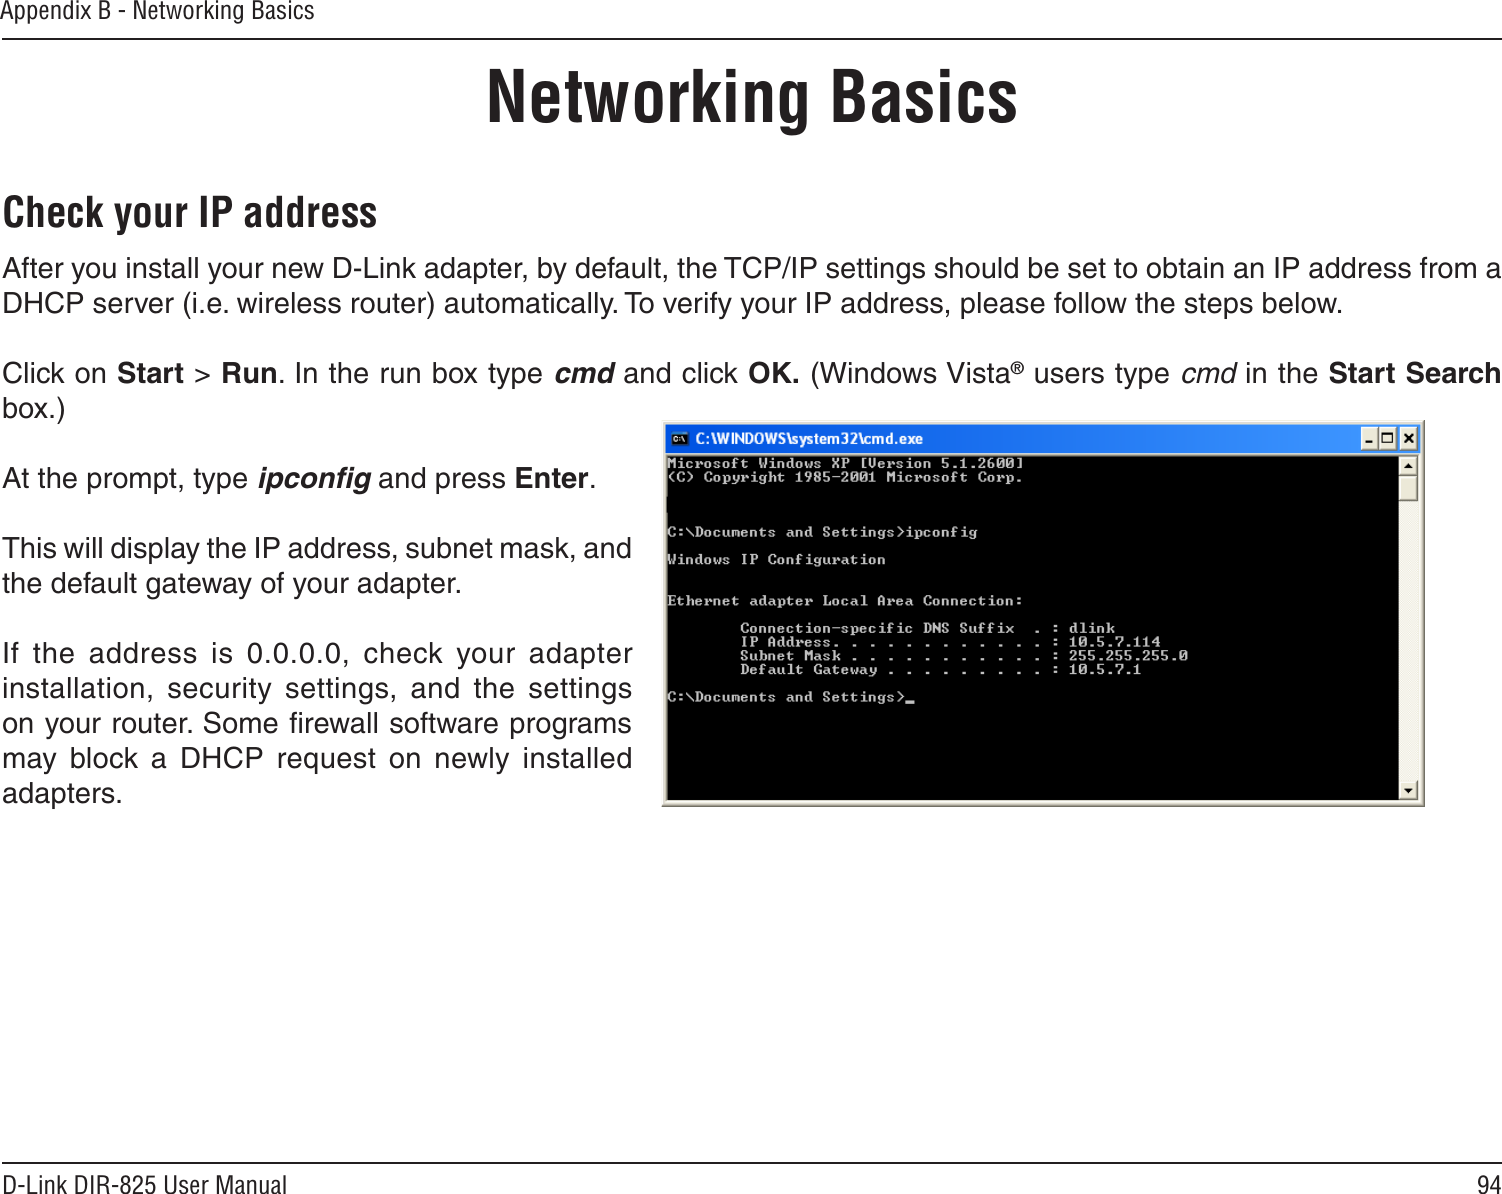 94D-Link DIR-825 User ManualAppendix B - Networking BasicsNetworking BasicsCheck your IP addressAfter you install your new D-Link adapter, by default, the TCP/IP settings should be set to obtain an IP address from a DHCP server (i.e. wireless router) automatically. To verify your IP address, please follow the steps below.Click on Start &gt; Run. In the run box type cmd and click OK. (Windows Vista® users type cmd in the Start Search box.)At the prompt, type ipconﬁg and press Enter.This will display the IP address, subnet mask, and the default gateway of your adapter.If  the  address  is  0.0.0.0,  check  your  adapter installation,  security  settings,  and  the  settings on your router. Some ﬁrewall software programs may  block  a  DHCP  request  on  newly  installed adapters. 